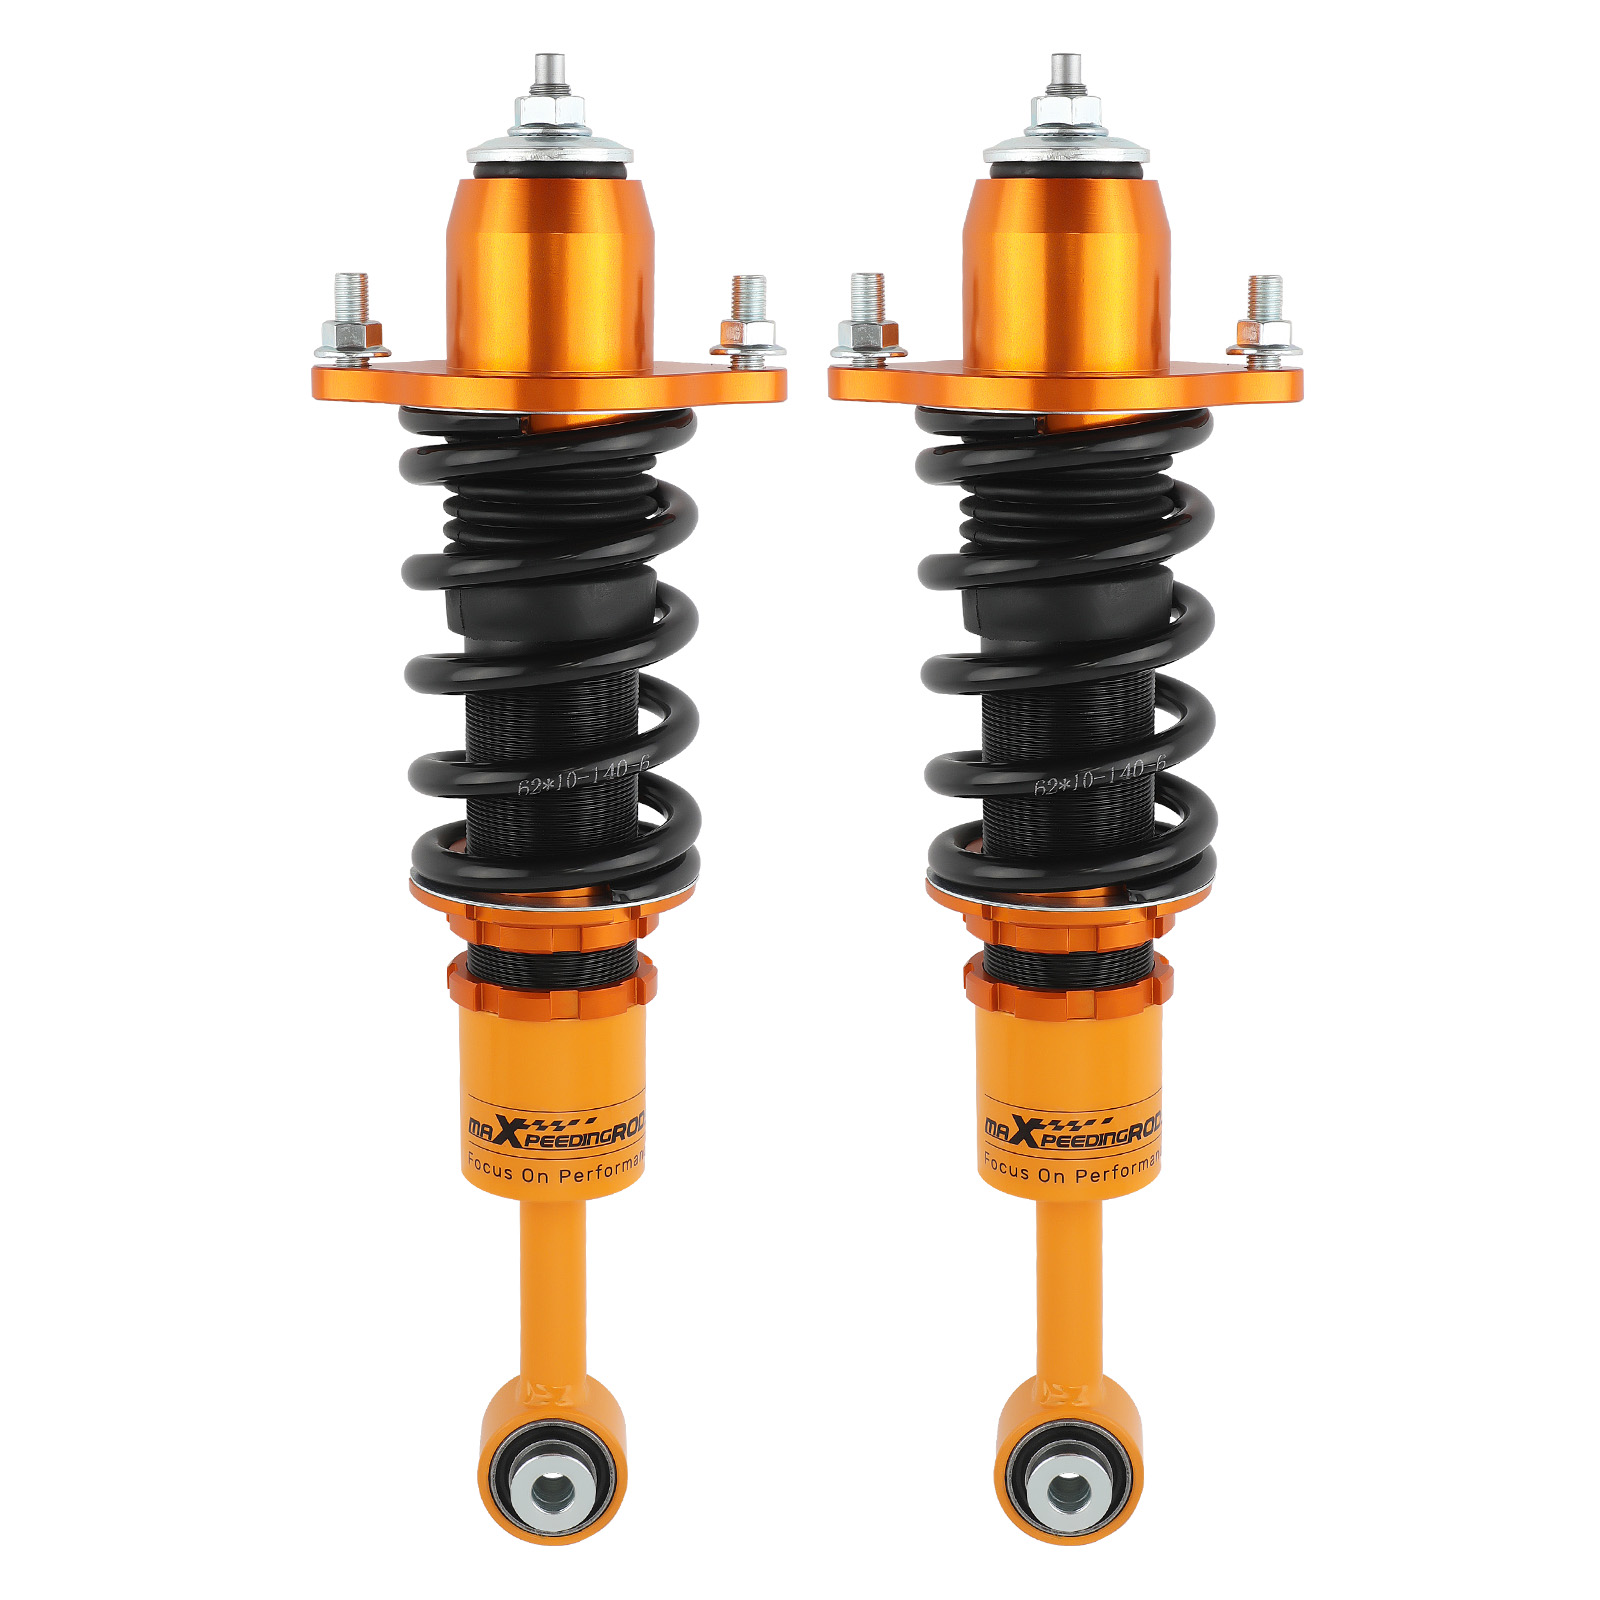 Coilovers Coil Spring For Mitsubishi Lancer 4G94 4G69 CS6A /CS7A FWD 2002-2006